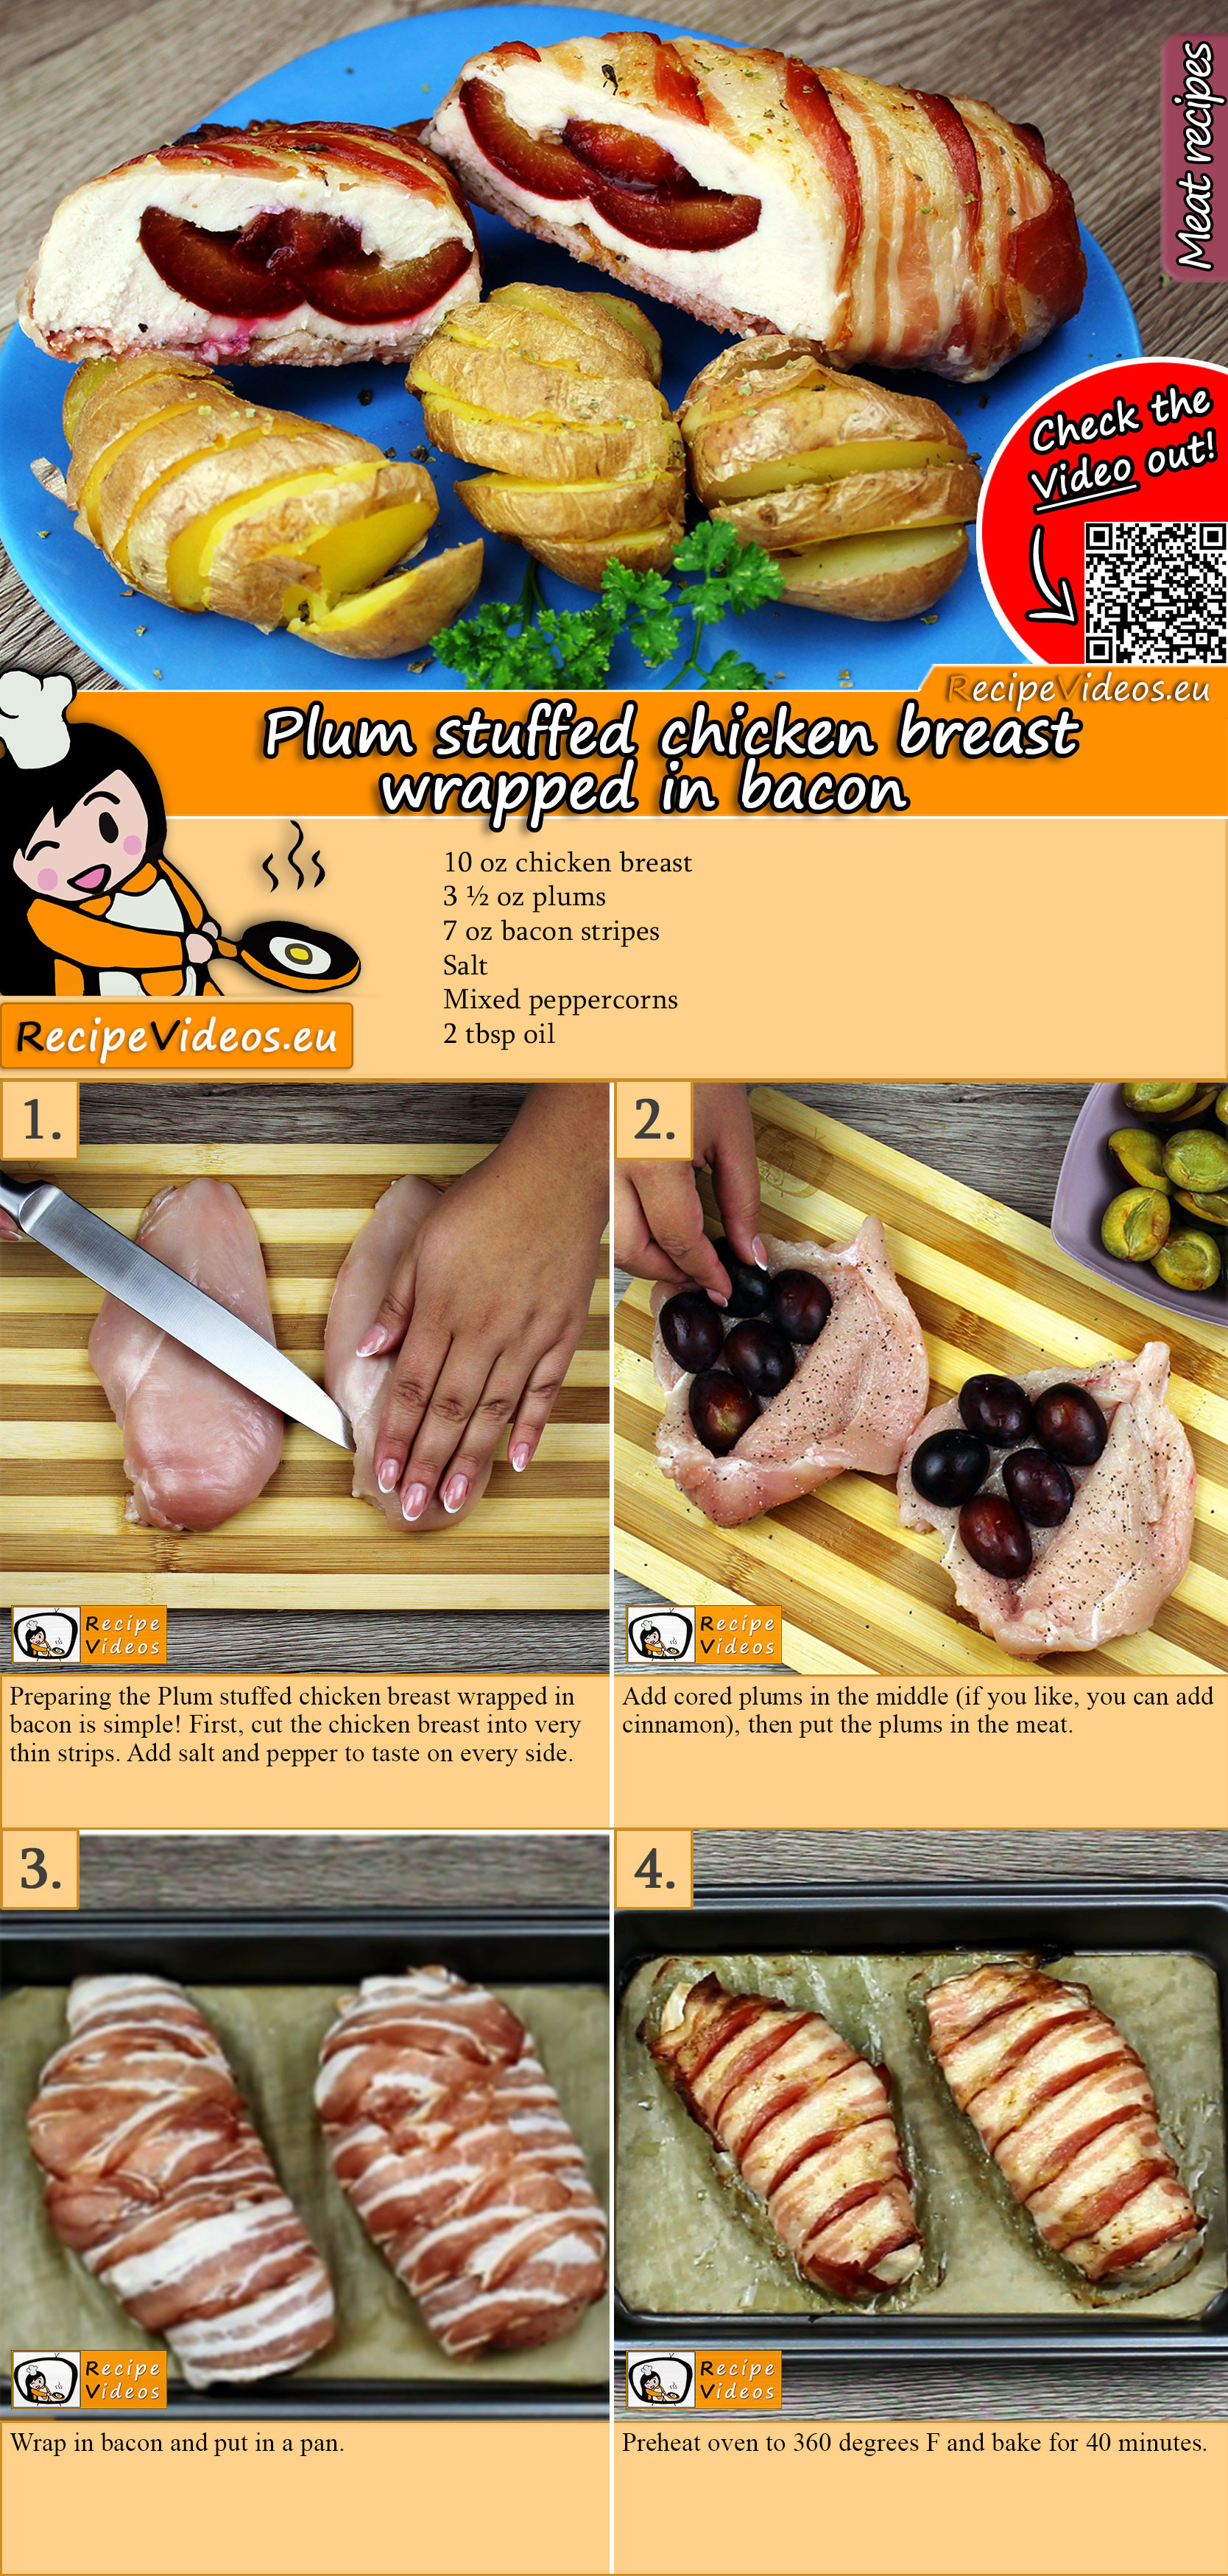 Plum stuffed chicken breast wrapped in bacon recipe with video